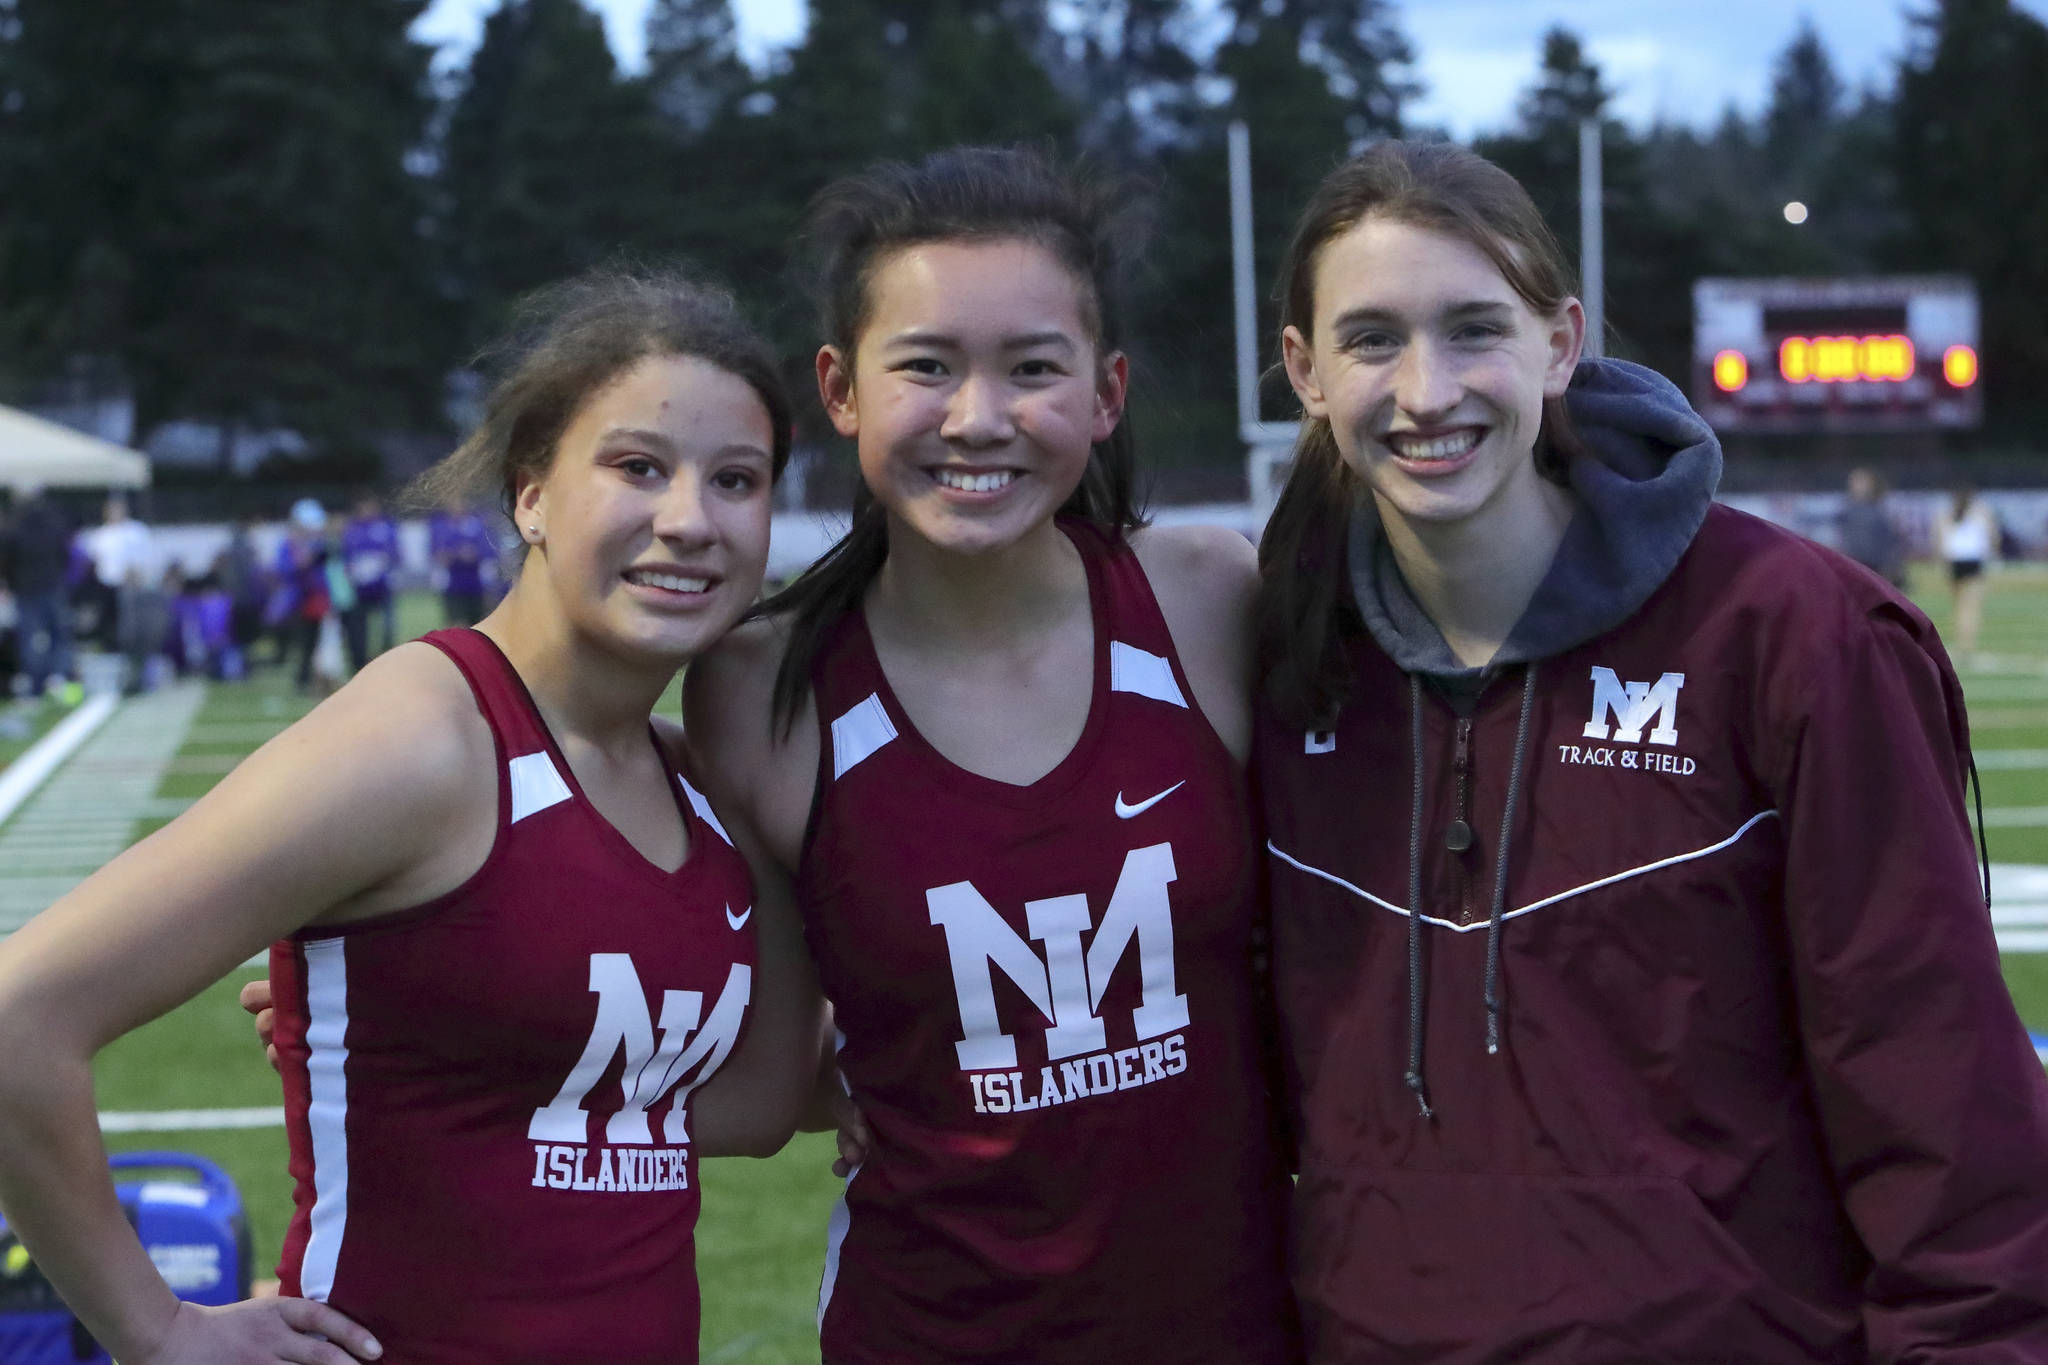 Photo courtsy of Jay Na                                The Mercer Island Islanders girls and boys track teams performed well in a double-dual meet against the Lake Washington Kangaroos and Sammamish Totems on March 21. The Islanders girls track squad earned a 98-86 win against Lake Washington and a 134-45 triumph against Sammamish.                                The Mercer Island Islanders boys track team defeated Sammamish 126-47 but lost to Lake Washington 139-34. Ashley Rudd, Maya Virdell, Kayla Lee and Maggie Baker were members of the winning girls 800-meter relay squad with a time of 1:48.34. Virdell, Lee and Baker are pictured in the above photo. Islanders girls athletes earning first place in their respective events consisted of Chloe Michaels (1600 meters, 3200 meters), Lee (200 meters, 1600-meter relay), Baker (400 meters, 1600-meter relay), Rudd (300 hurdles, 400-meter relay), Virdell (400-meter relay), Eliza Crenshaw (400-meter relay), Katie McCormick (400-meter relay), Ella Hensey (1600-meter relay, long jump), Gretchen Blohm (1600-meter relay) and Faith Osei-Tutu (shot-put). Islanders’ boys athletes capturing first place in their respective events were Alexander Benson (3200 meters), Jack Clayville (110 hurdles) and Jeffery Tian (pole vault).